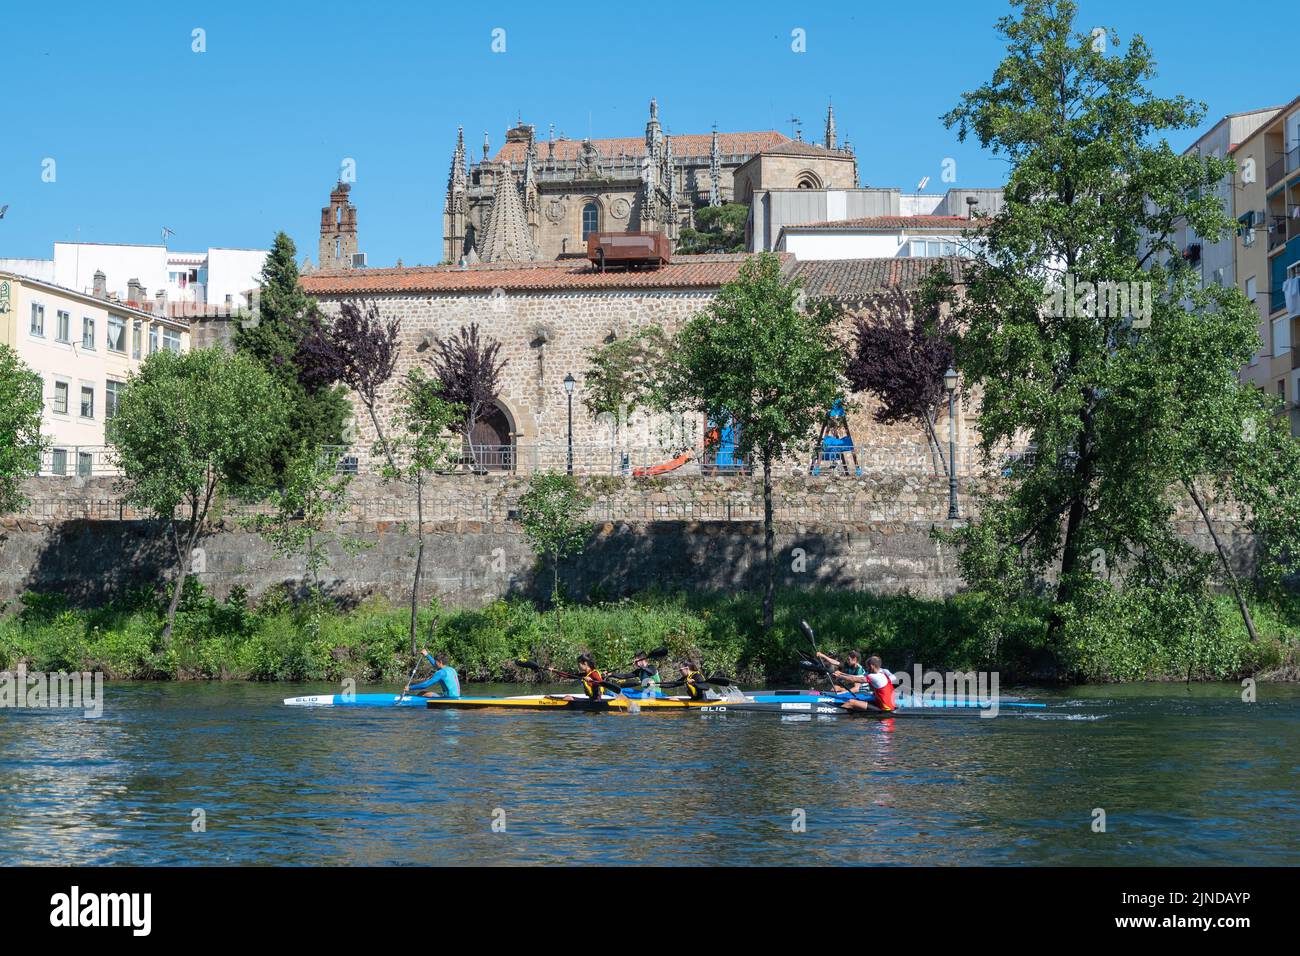 A group or team of young people practices canoeing riding in his canoe navigating the Jerte river and the cathedral in the background Stock Photo